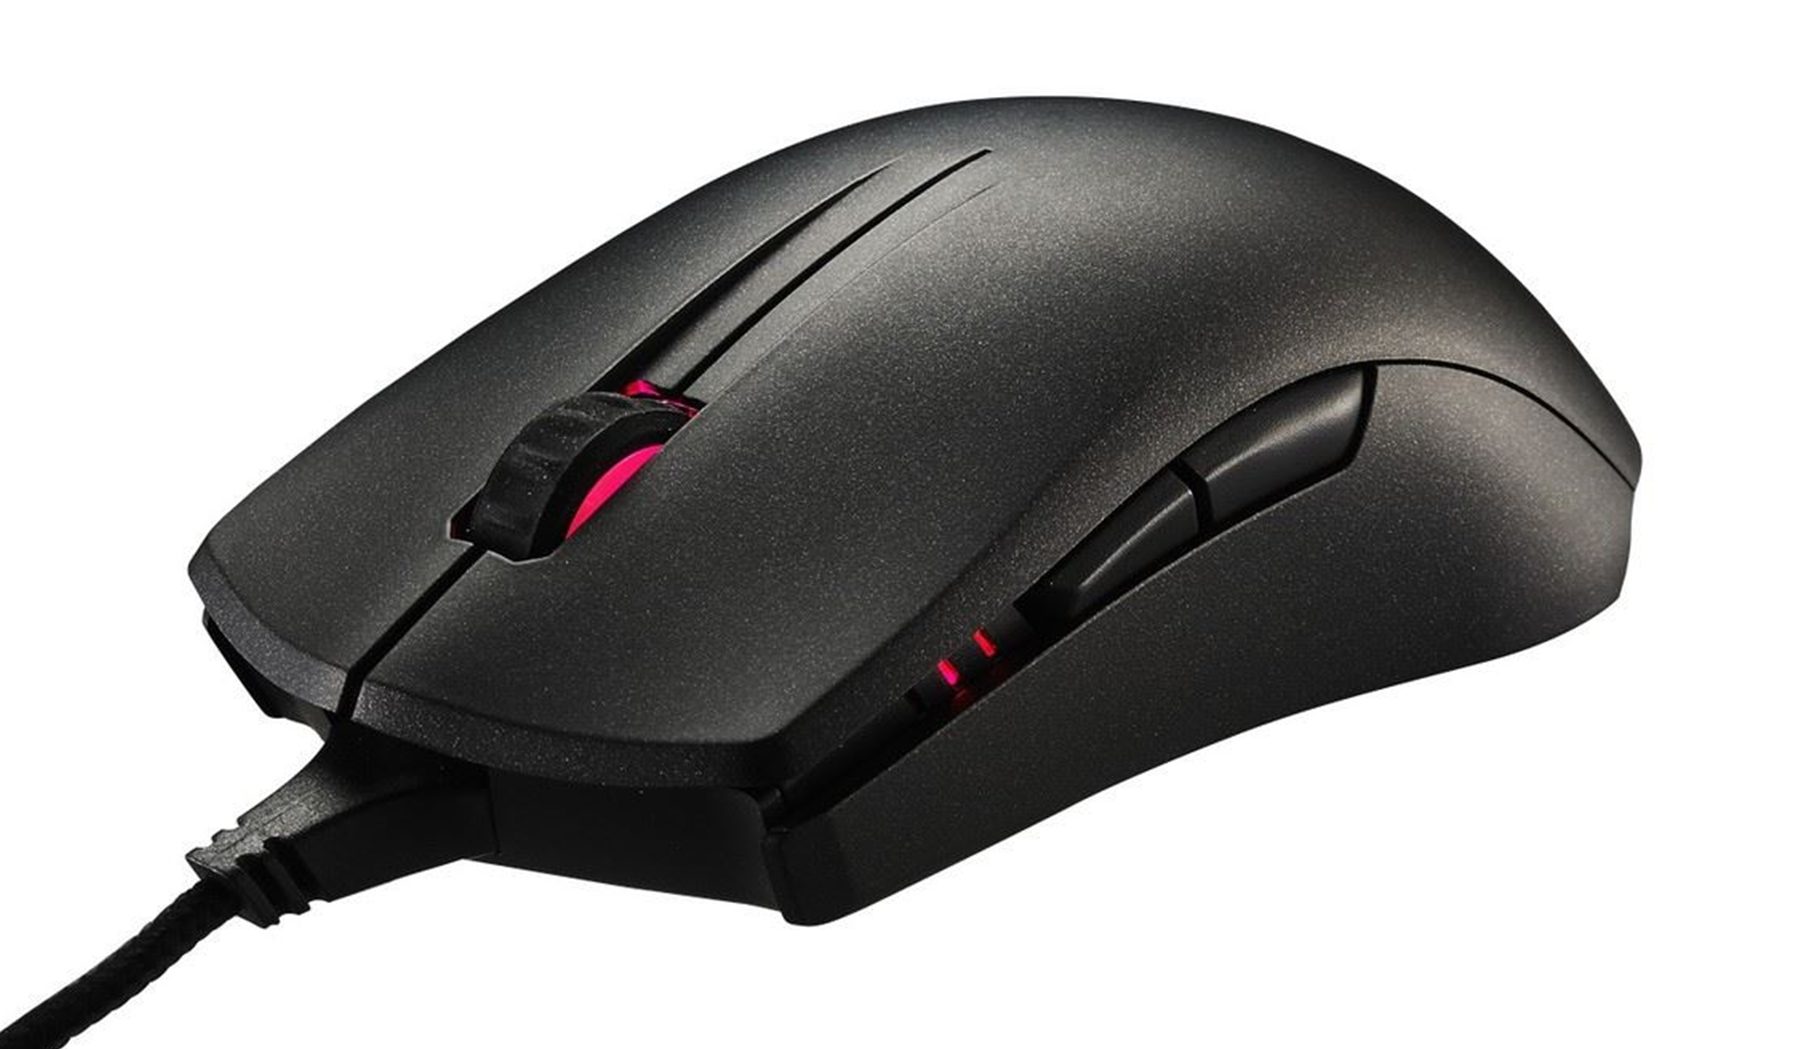 CoolerMaster Mastermouse Pro L